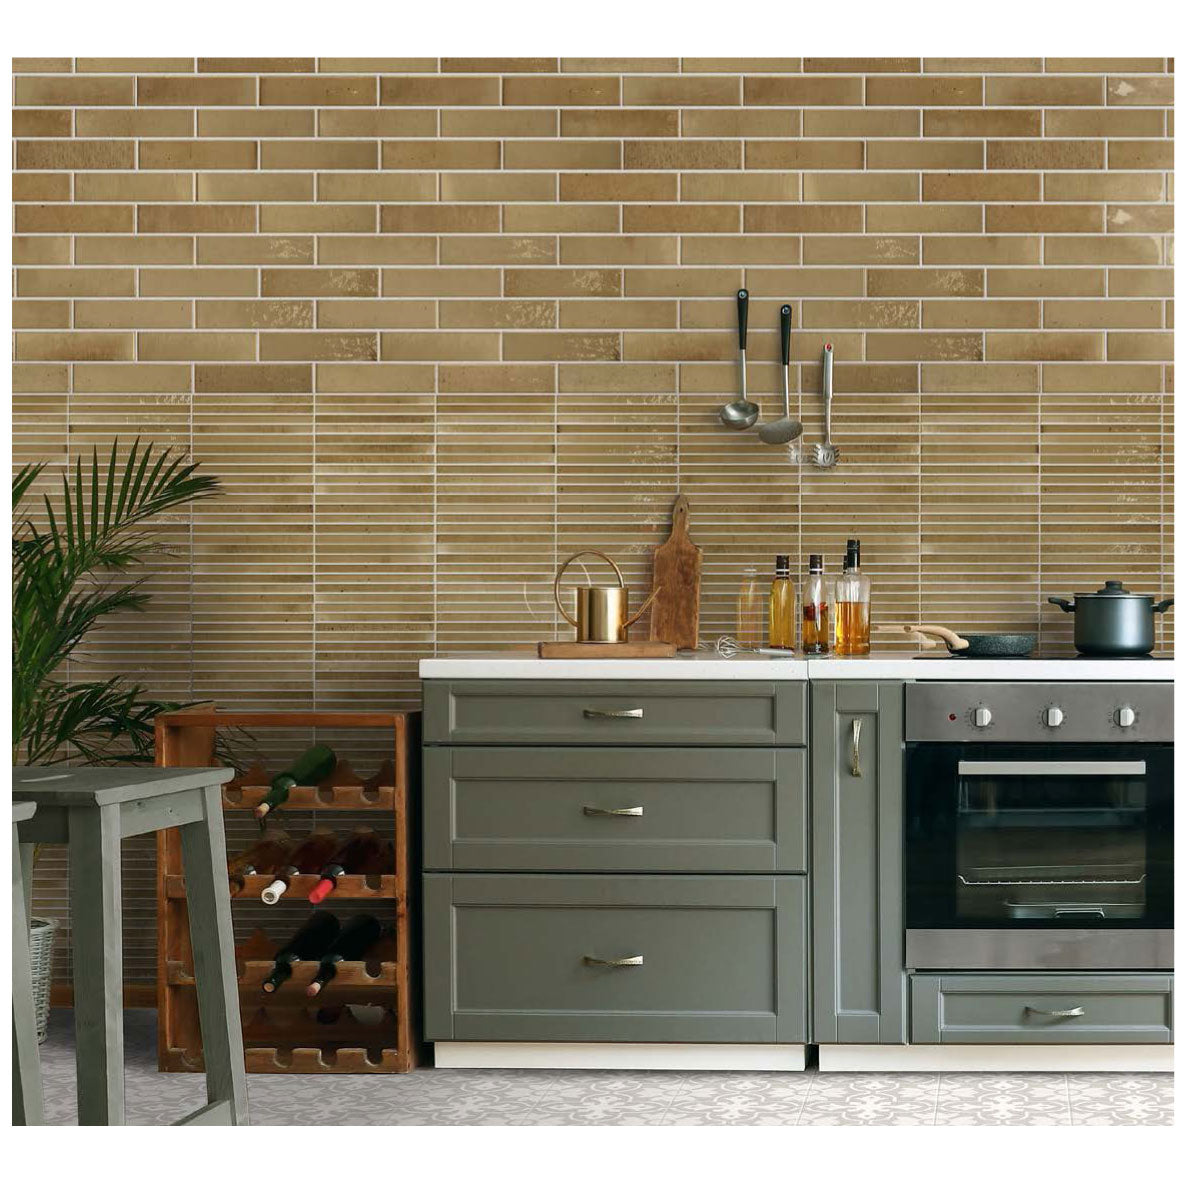 Cobsa - Homey Series 3 in. x 10 in. Porcelain Subway Tile - Curry